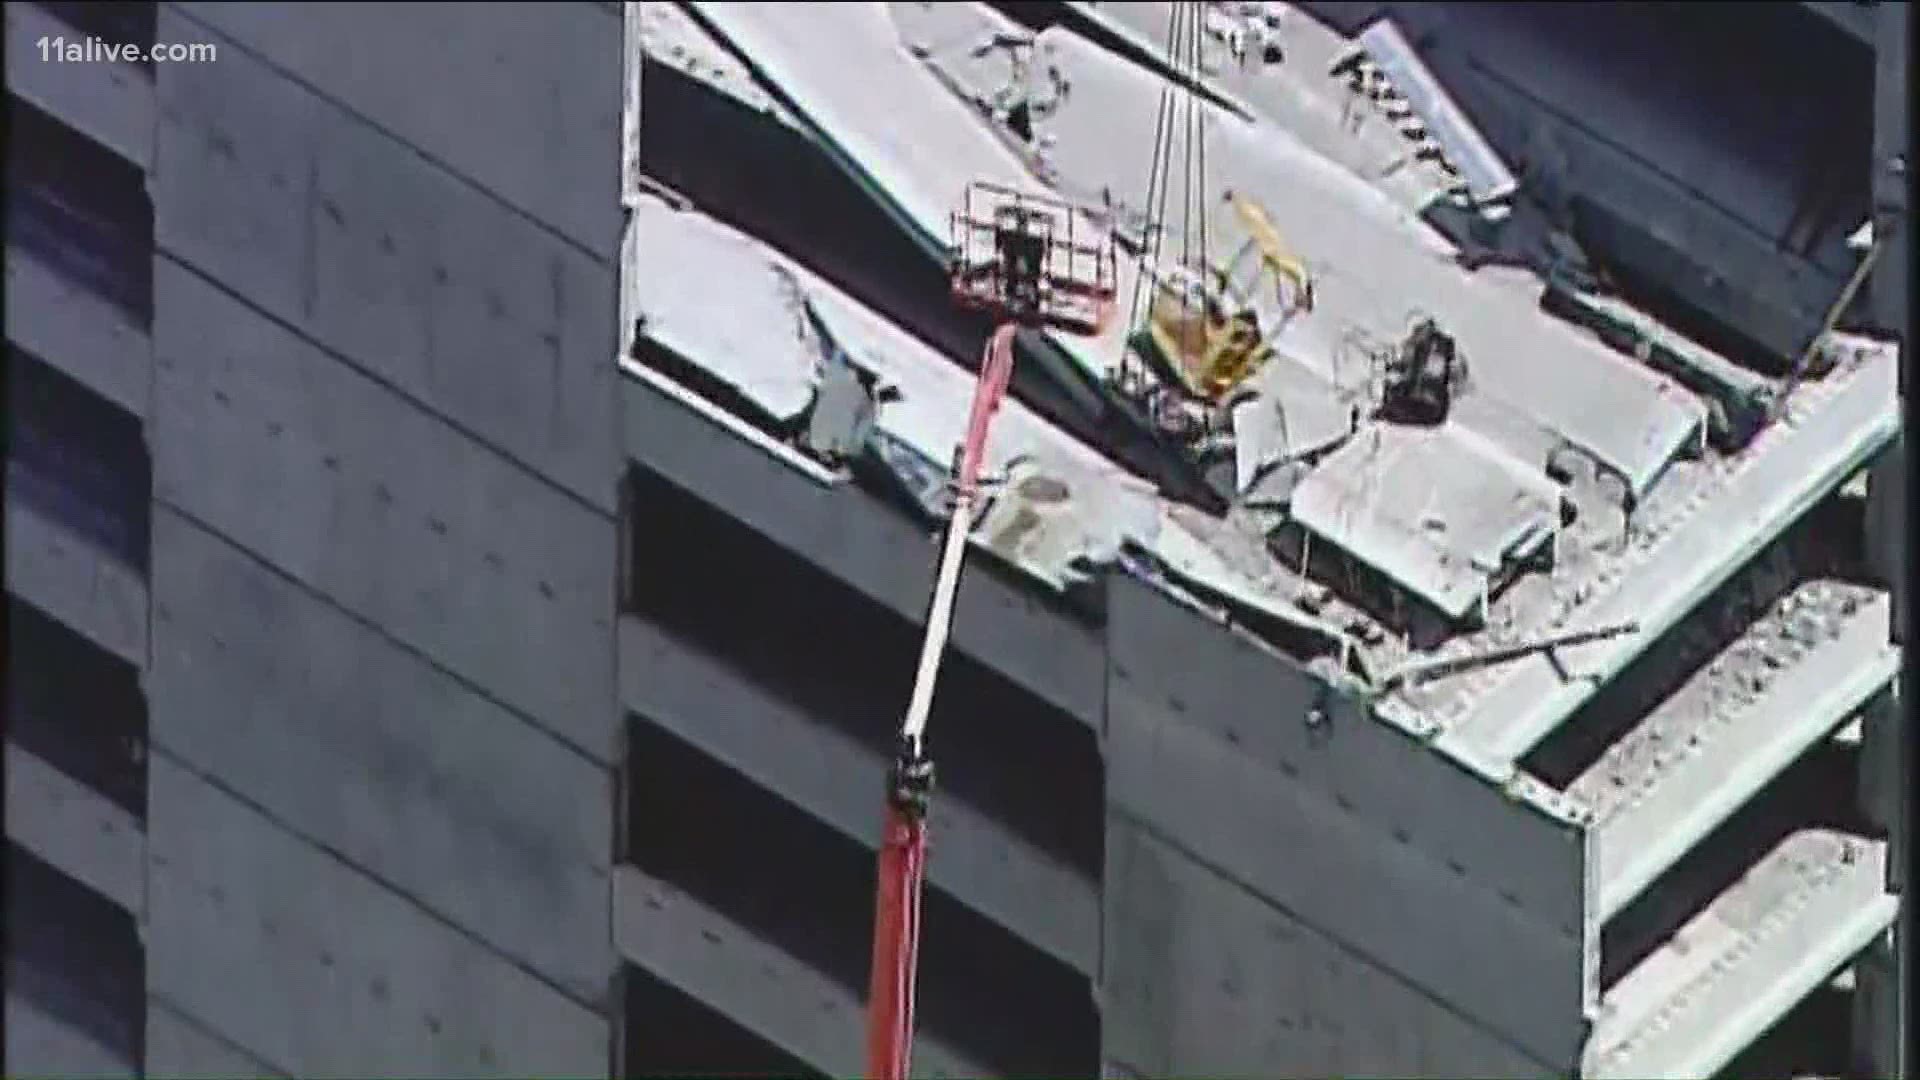 Multiple people were injured when a parking deck under construction collapsed at Emory.